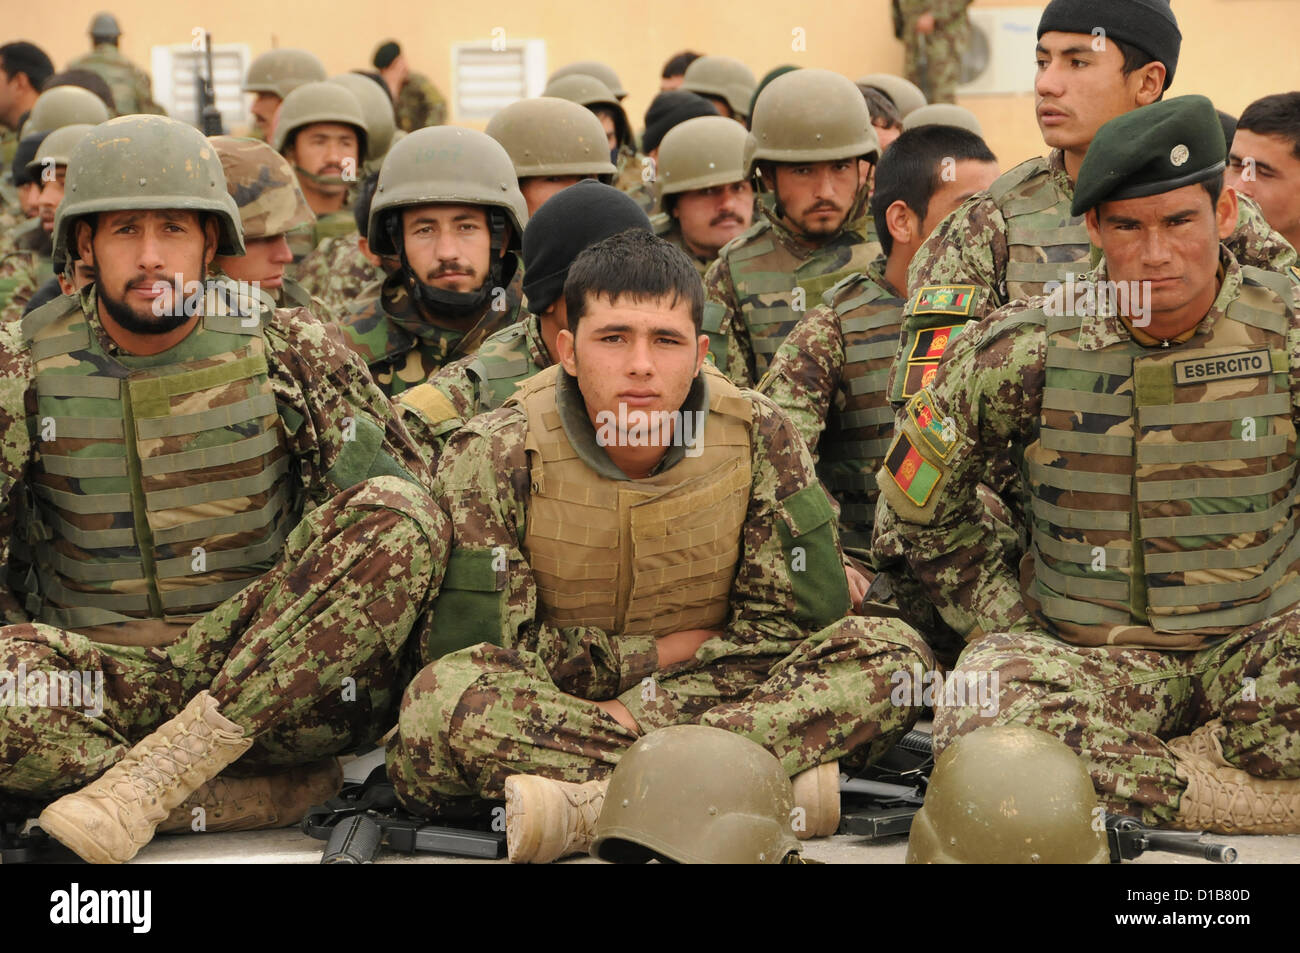 Farah Province, Afghanistan. 12th December 2012. Members of the Afghan National Army wait to participate in a Tranche 3 security transition ceremony at Camp Sayar December 12, 2012 in Farah province, Afghanistan. Stock Photo